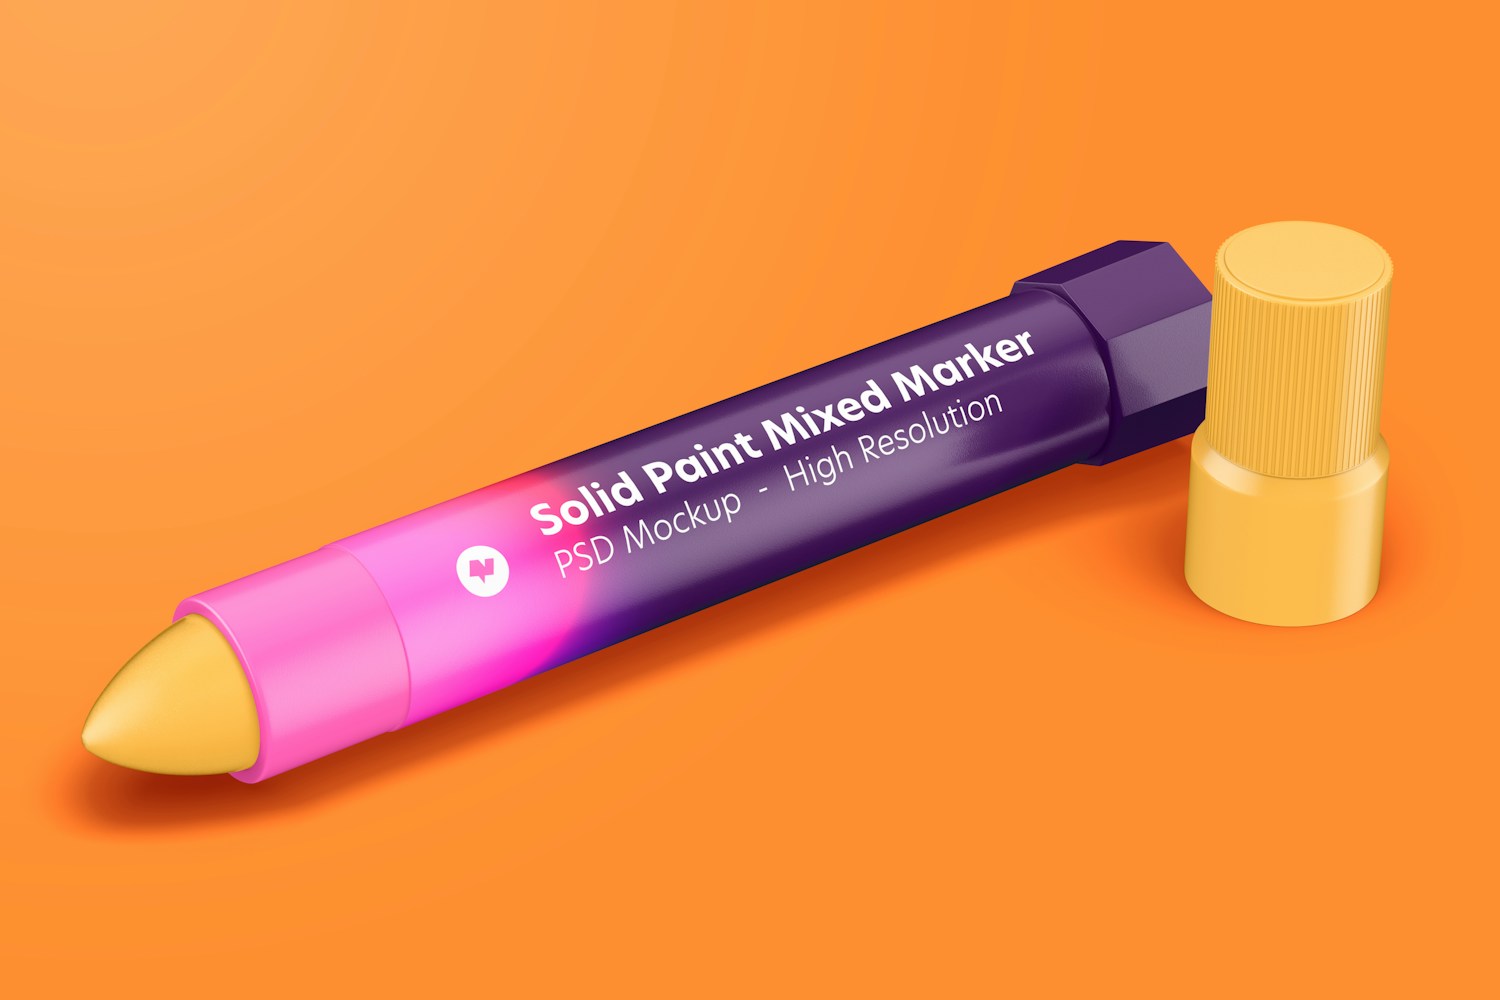 Solid Paint Mixed Marker Mockup, Opened